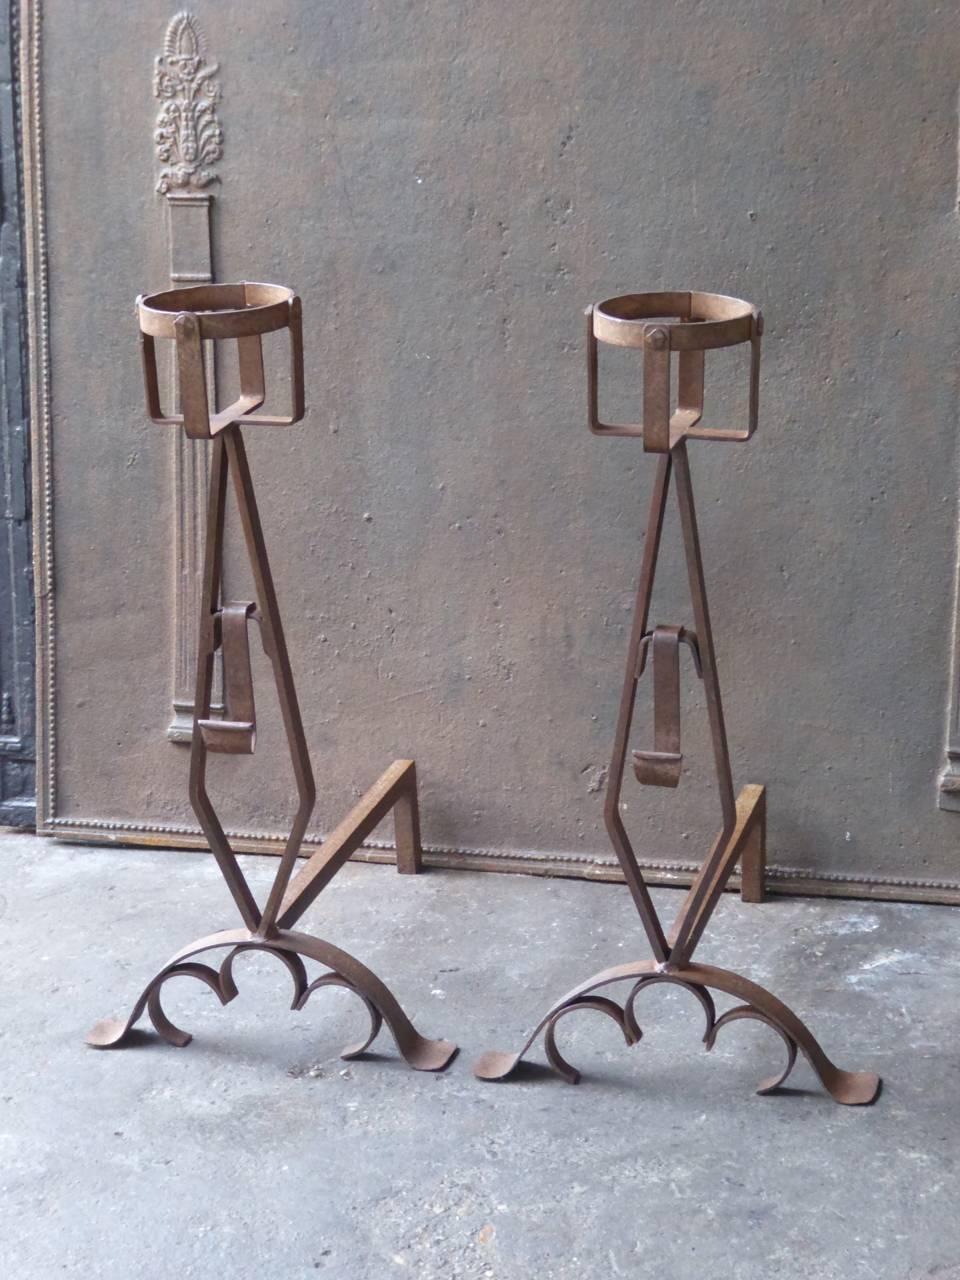 French andirons made of wrought iron. The condition of the andirons is good.

